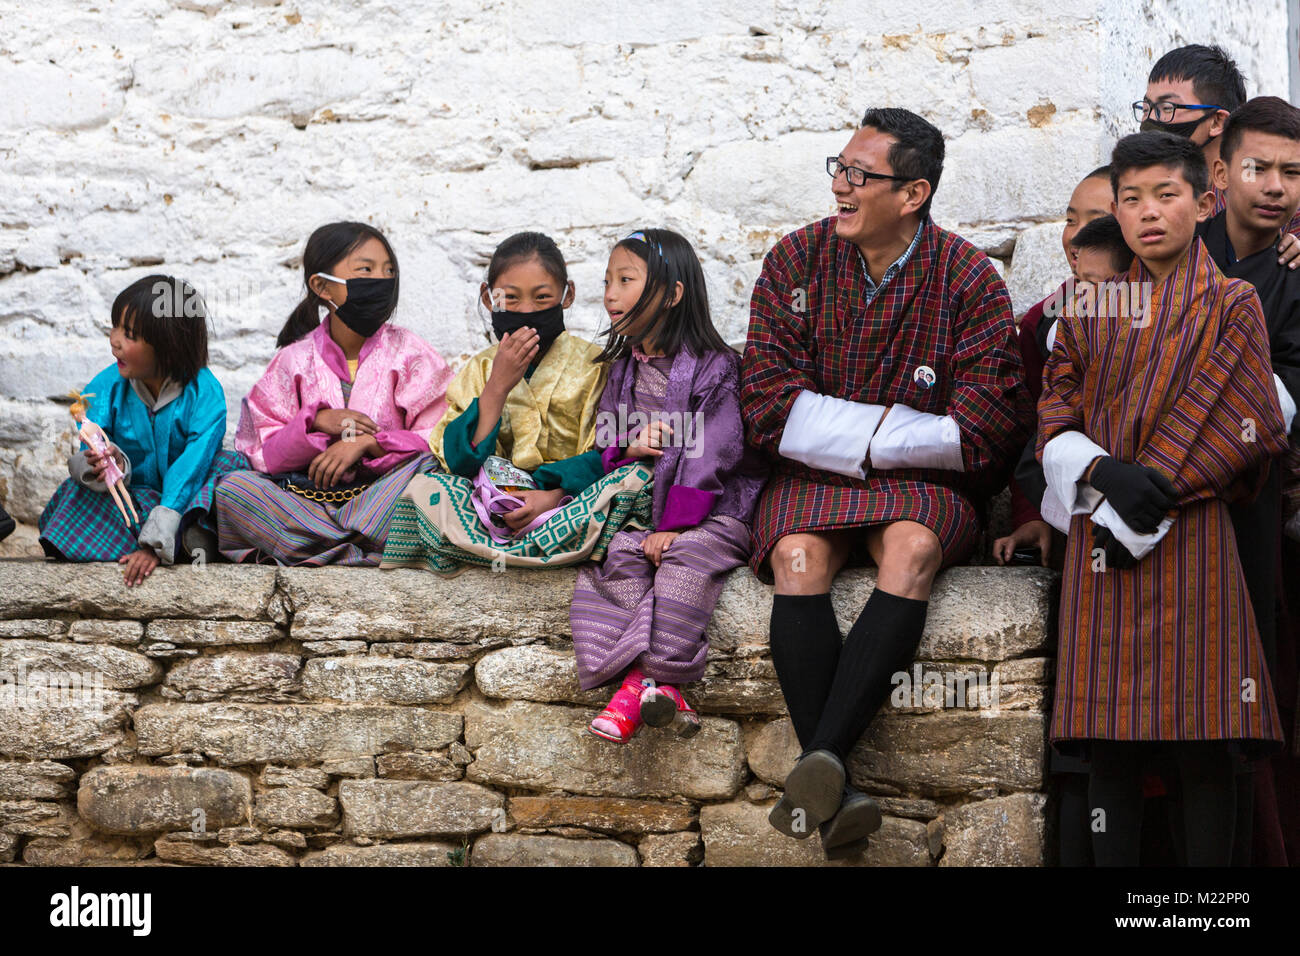 Prakhar Lhakhang, Bumthang, Bhutan.  Young Bhutanese Girls in Traditional Clothes, with Breathing Masks.  Men in Gho, the Traditional Men's Garment. Stock Photo